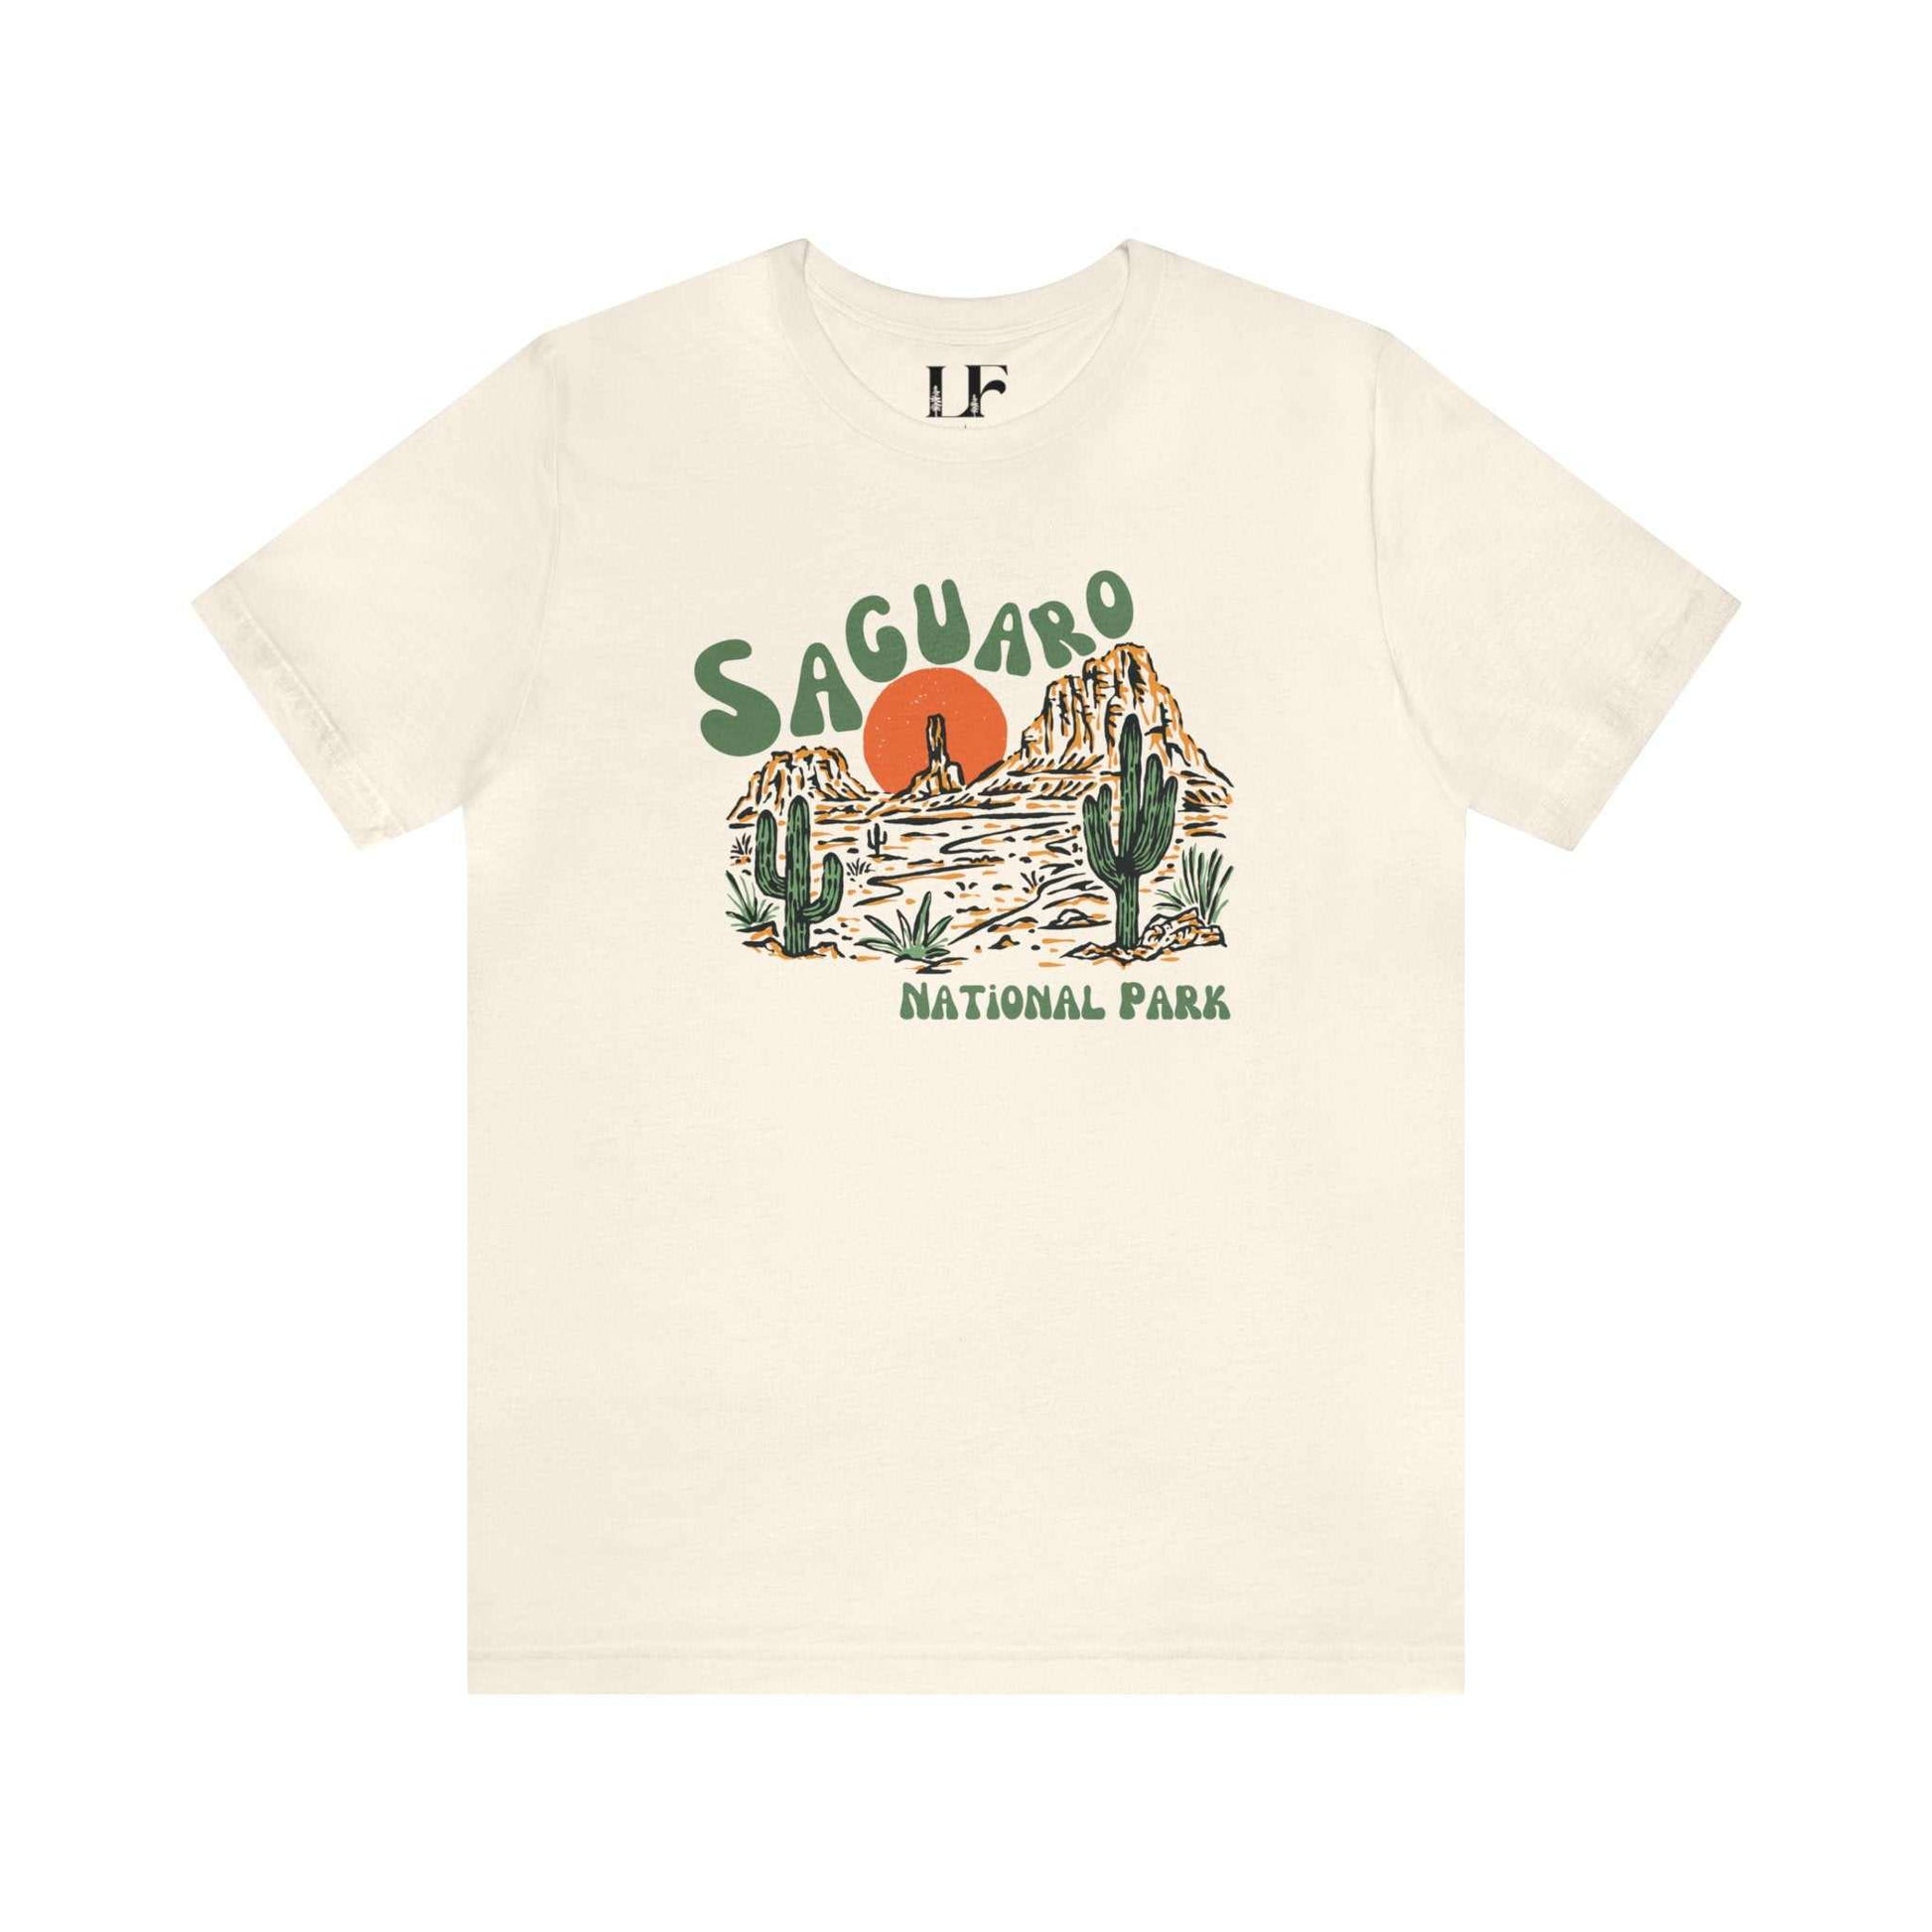 Saguaro National Park Shirt TrippyBring the beauty of Saguaro National Park into your wardrobe with this 70s retro and vintage styled oversized boyfriend t-shirt inspired by the magic of this iconic 